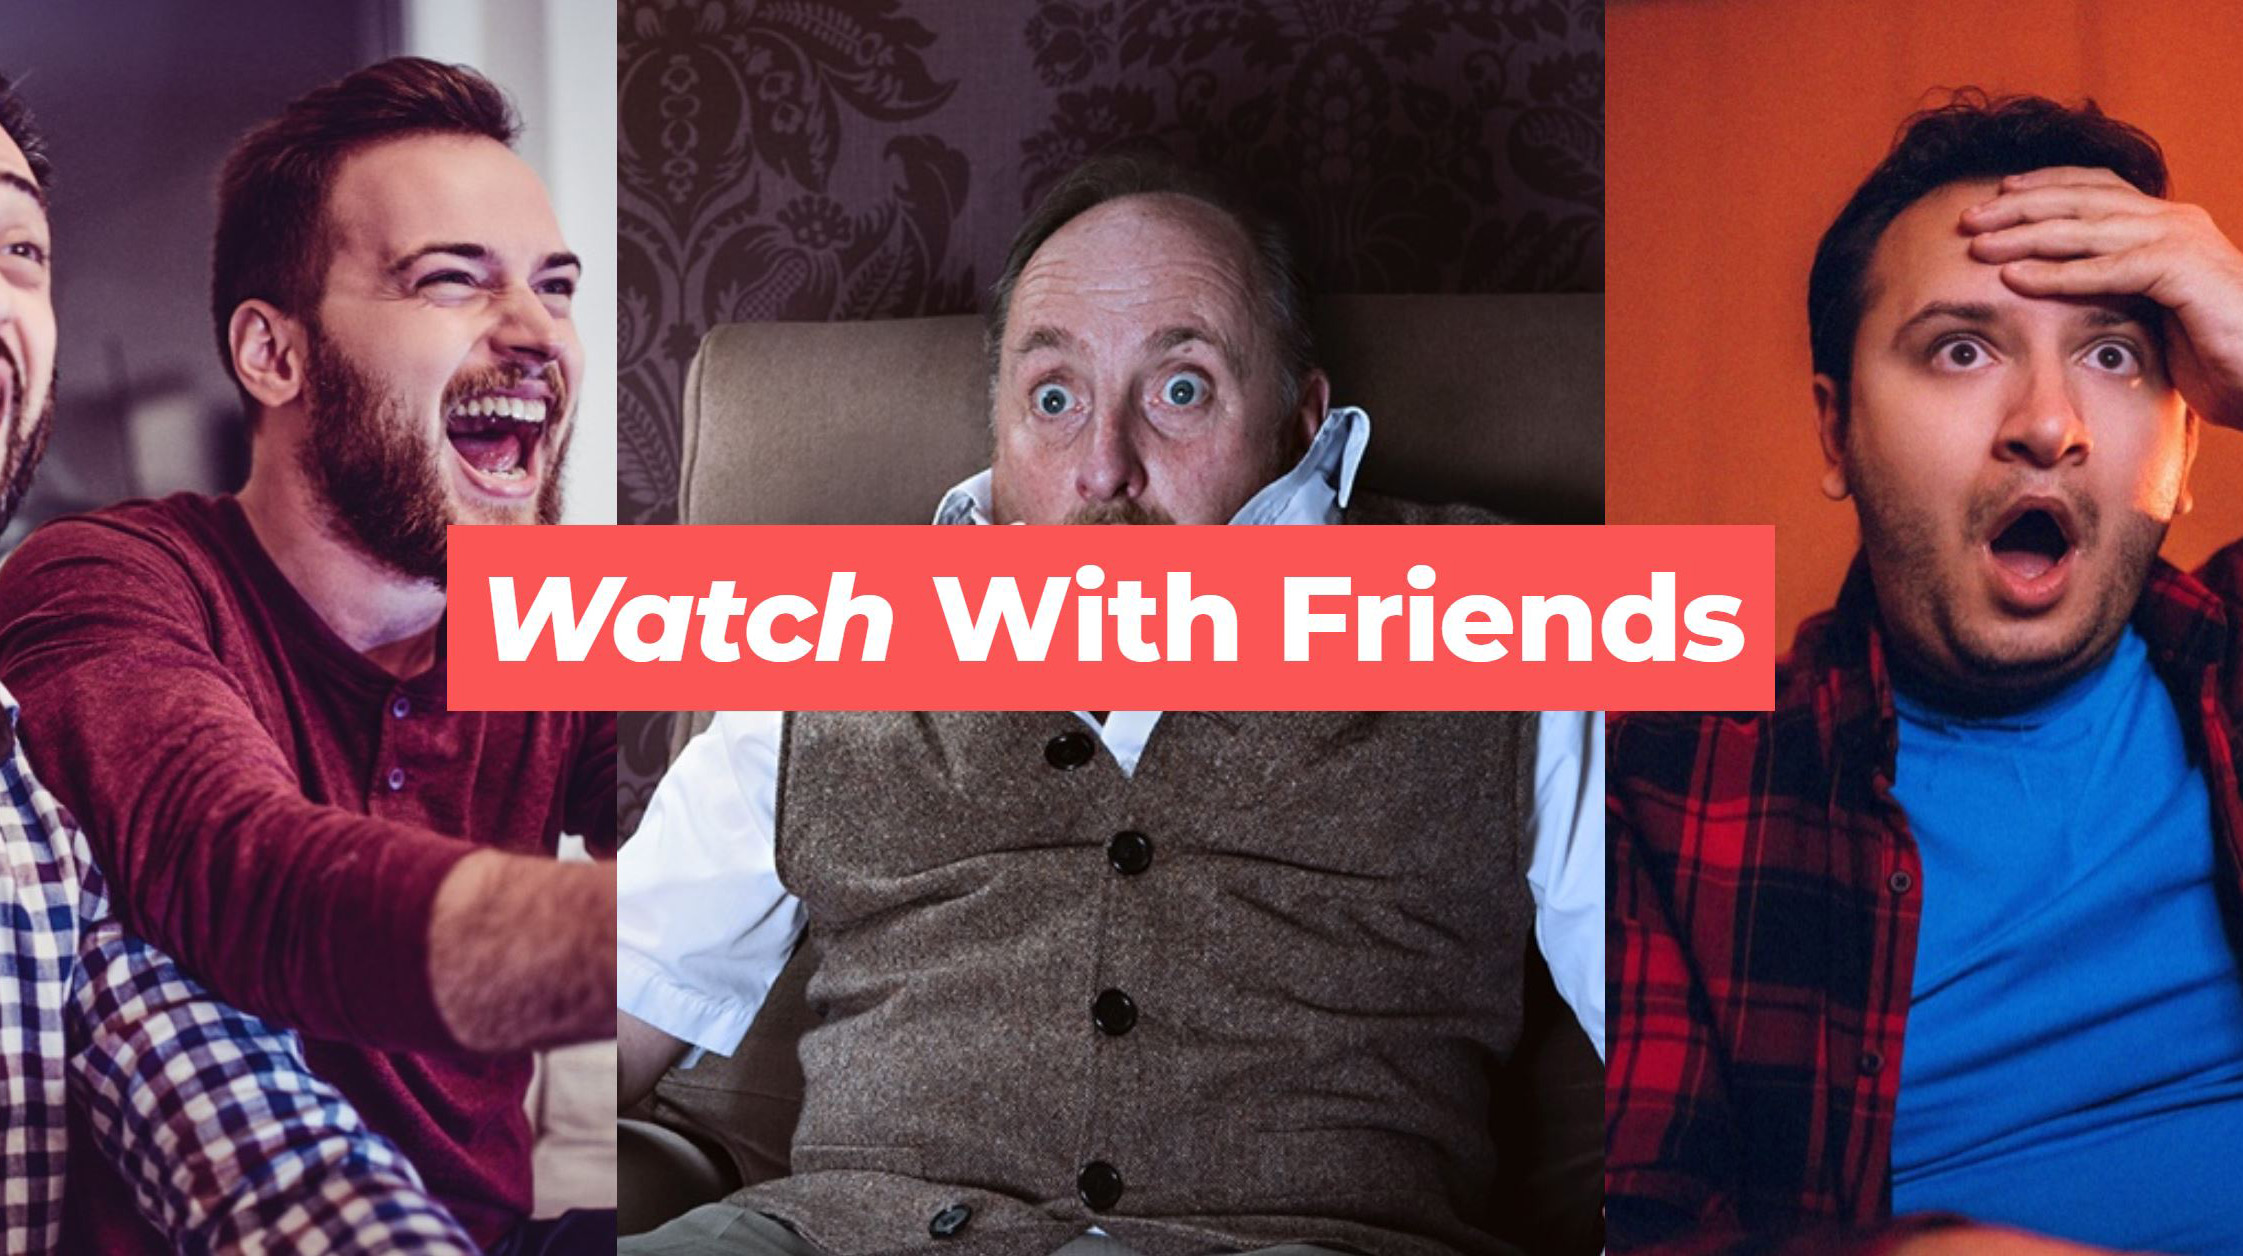 Watch With Friends app lets users make virtual Netflix viewing parties